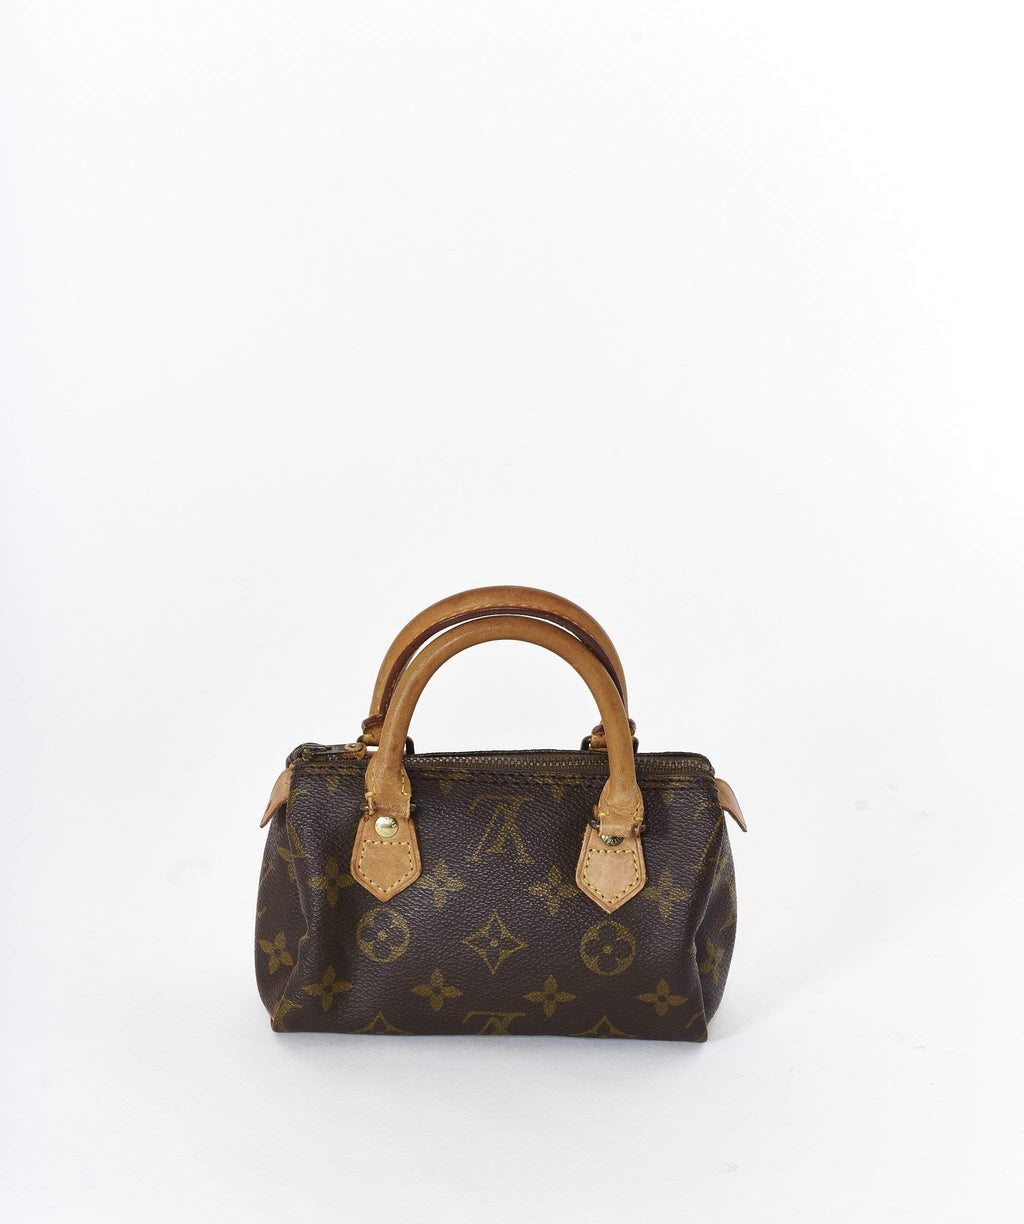 LOUIS VUITTON M41534 Mini Speedy With Strap Shoulder Bag Used 230906T